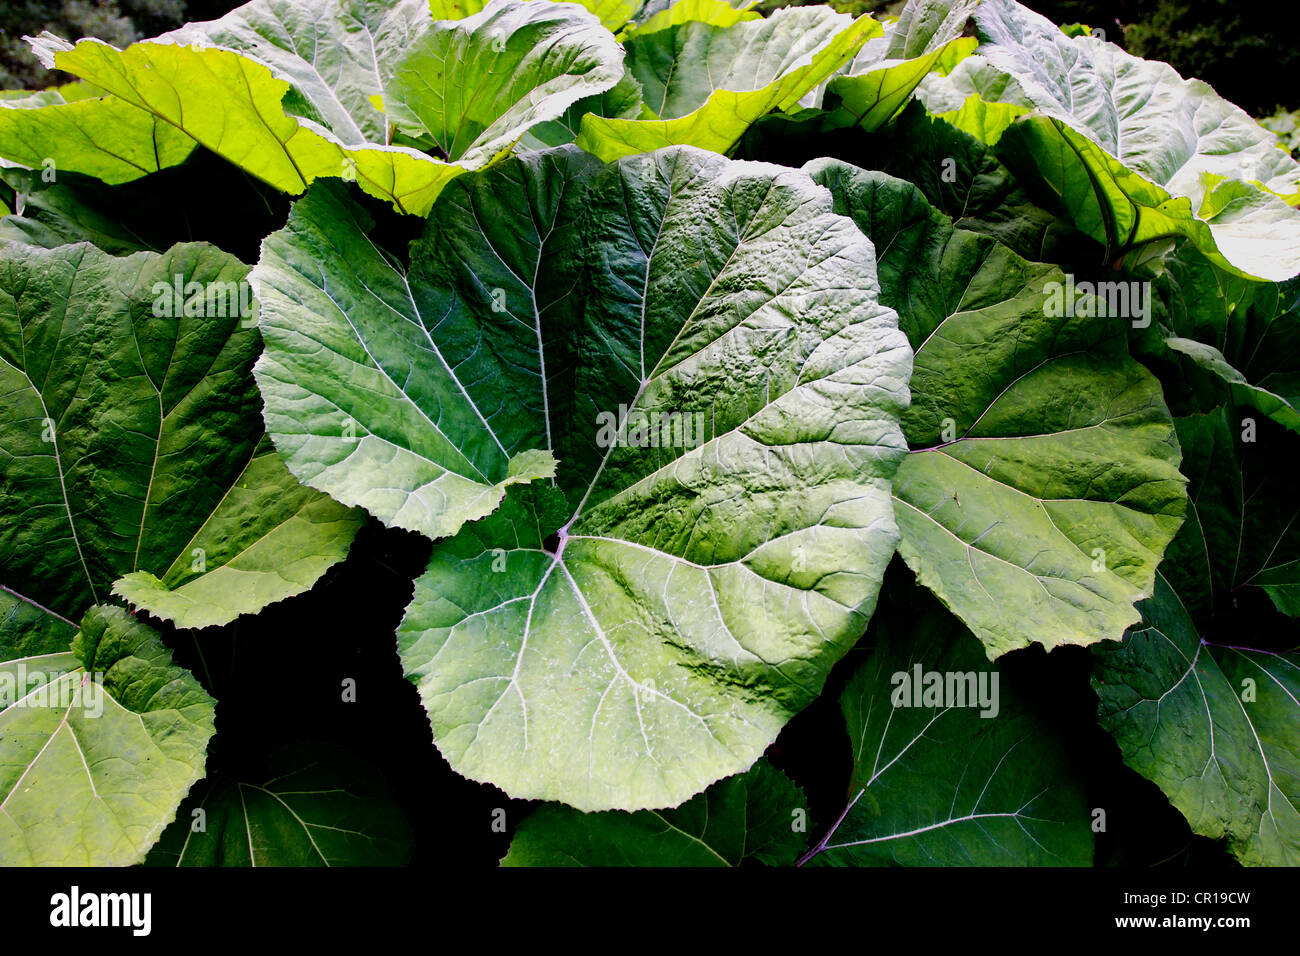 Large Butterbur (Petasitidis folium) leaves in the Wutach Gorge, Black Forest, Baden-Wuerttemberg, Germany, Europe Stock Photo